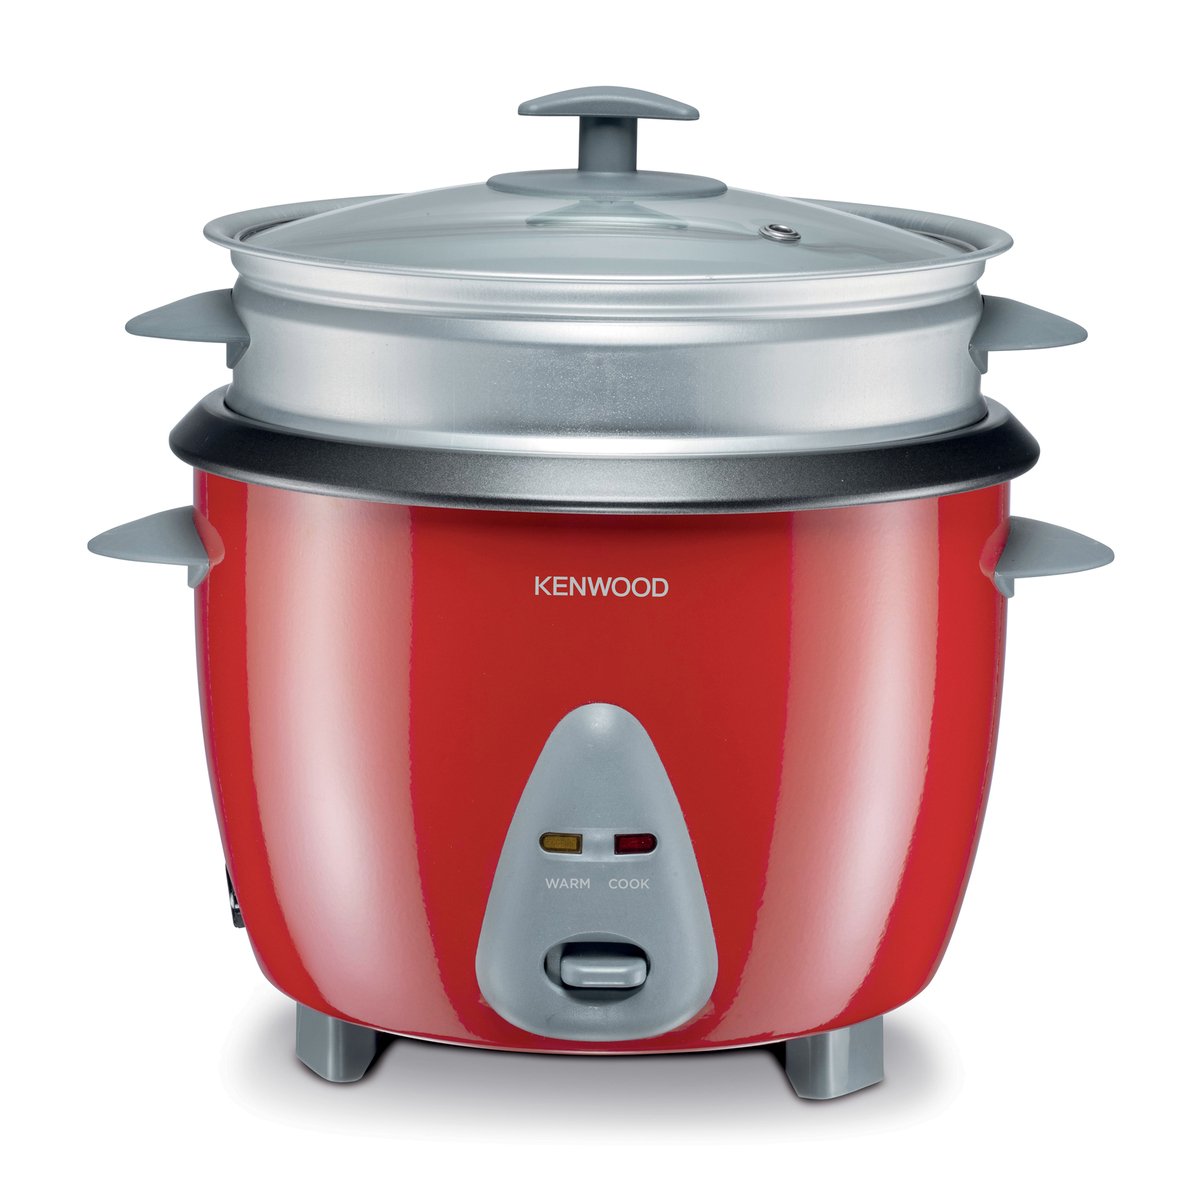 Kenwood Rice Cooker with Steamer, RED, 1.8LTR, RCM44.000RD